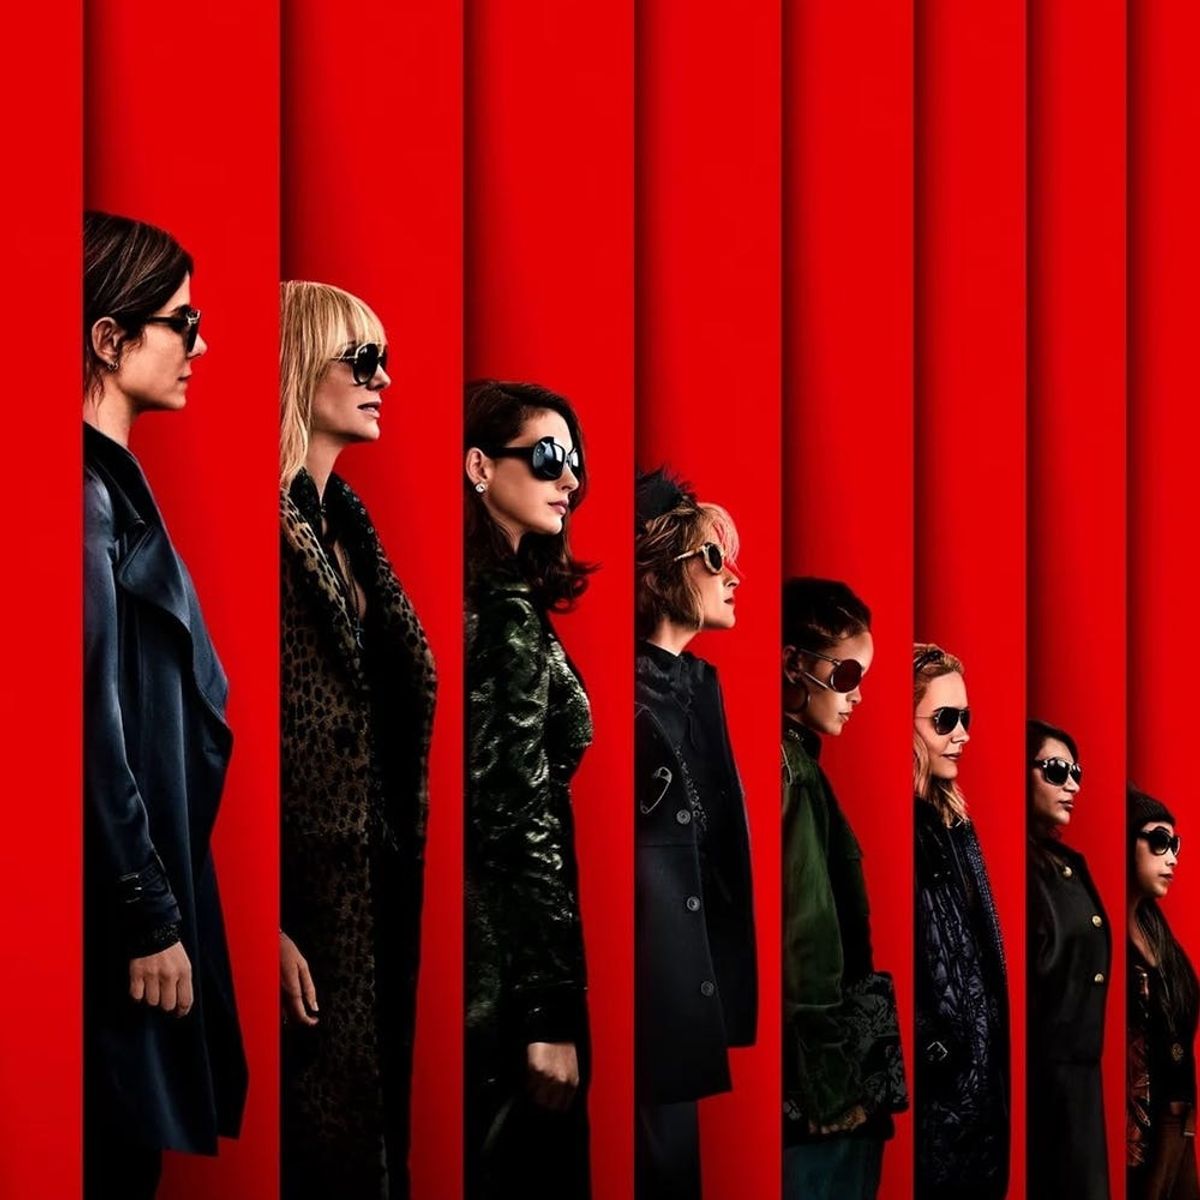 The First “Ocean’s 8” Poster Is Even Better Than We Hoped It Would Be